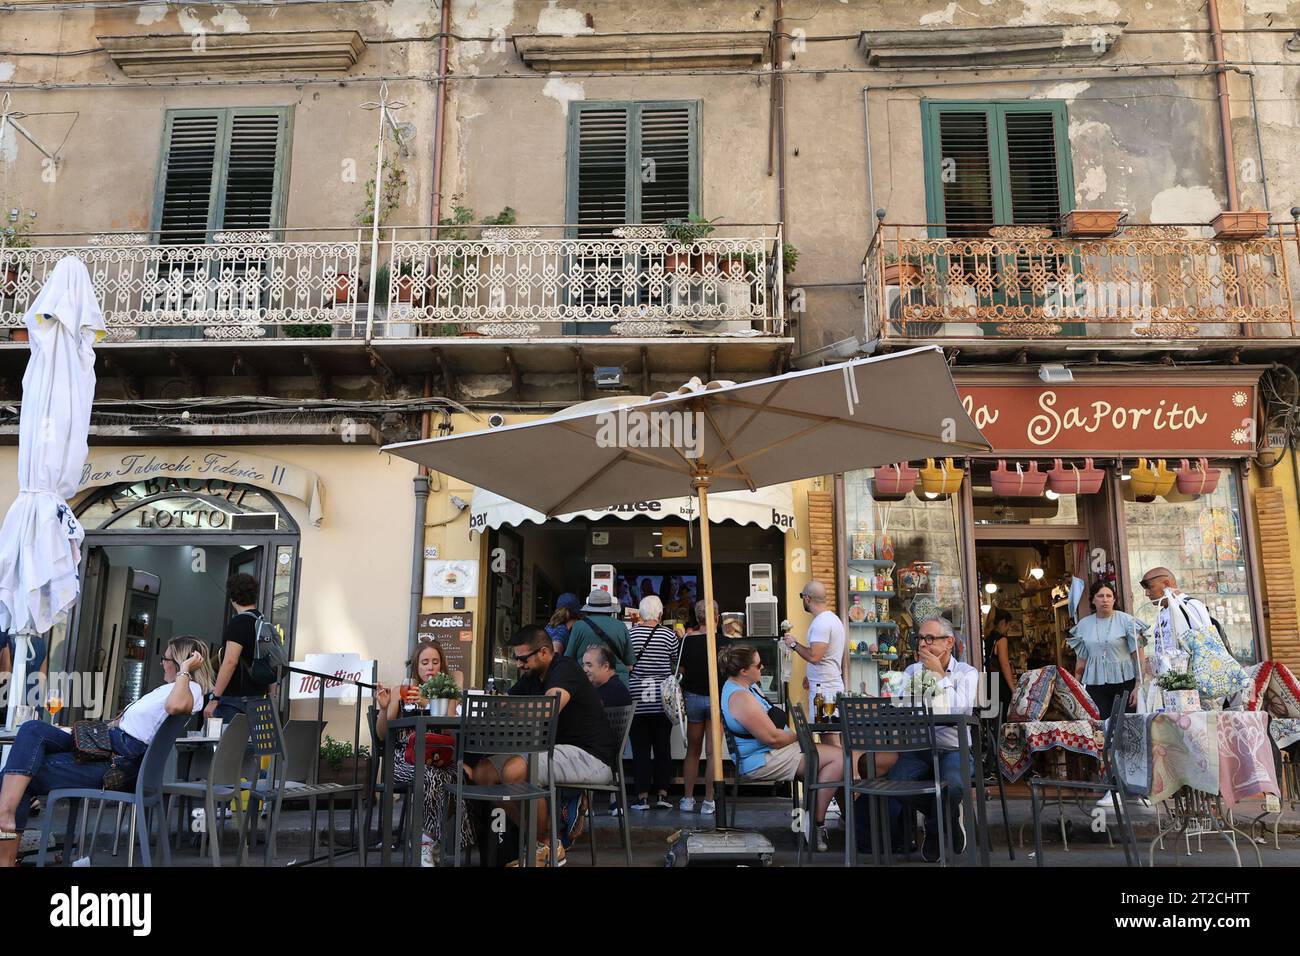 Cafe and bar on Via Vittoria Emanuele in Palermo, Sicily Stock Photo